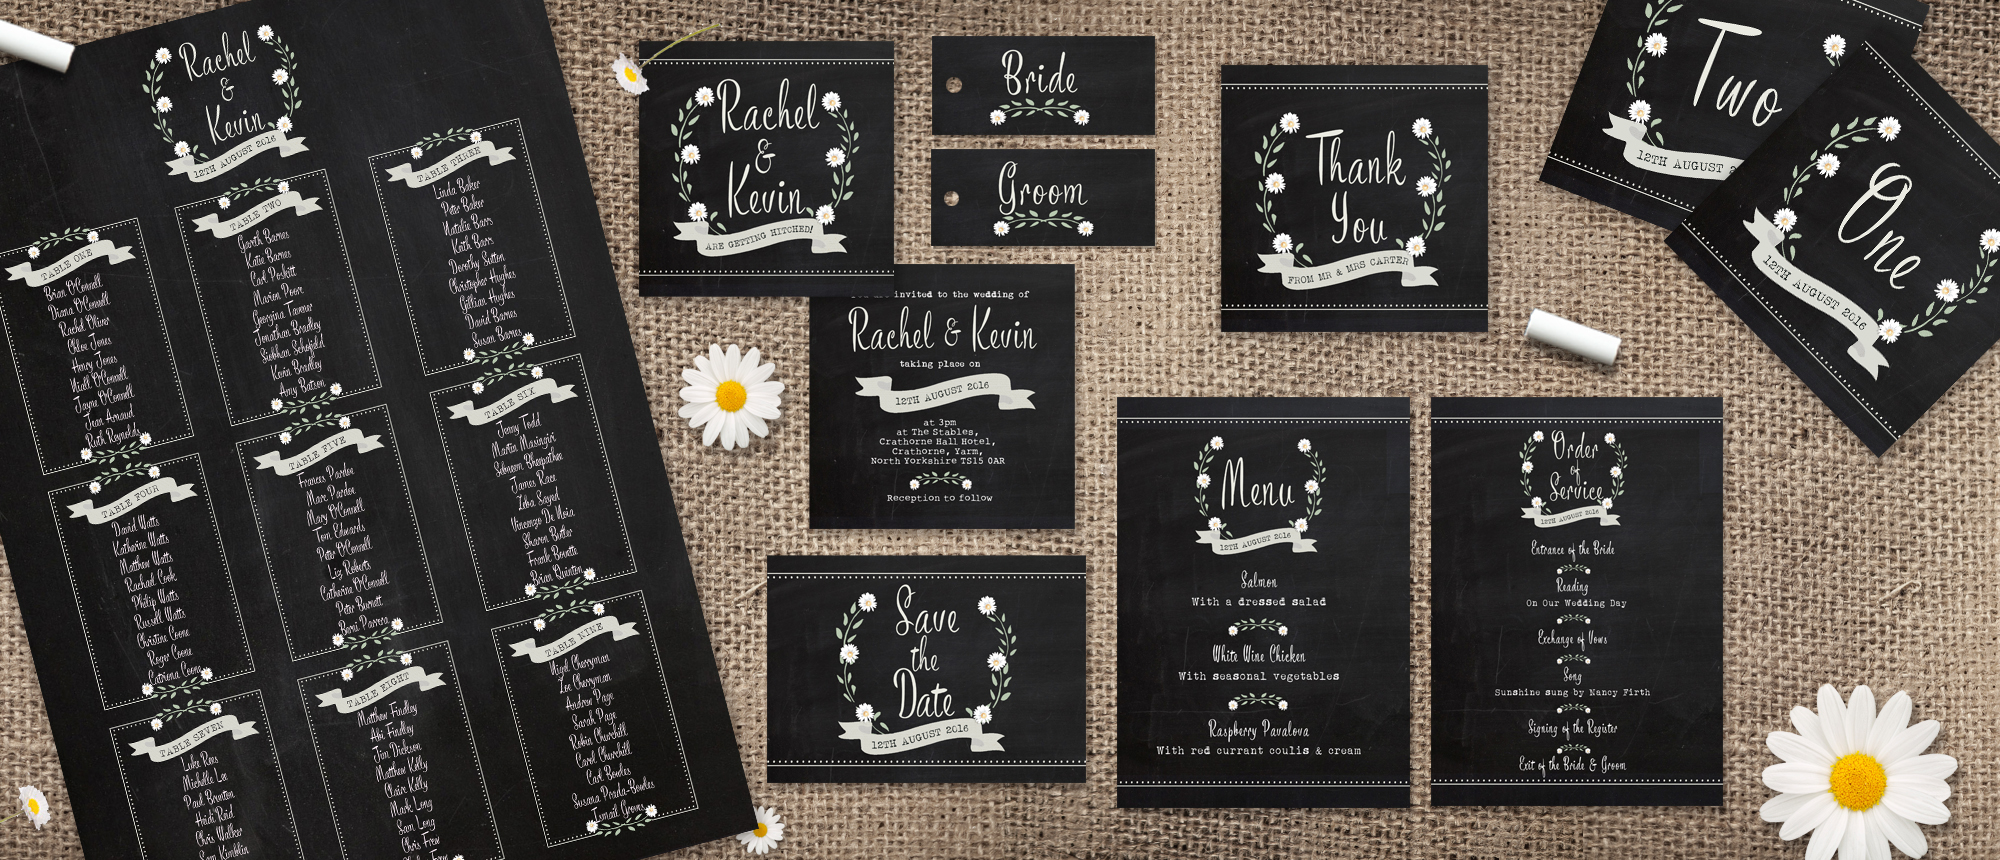 Heart Invites_Collection_Chalkboard